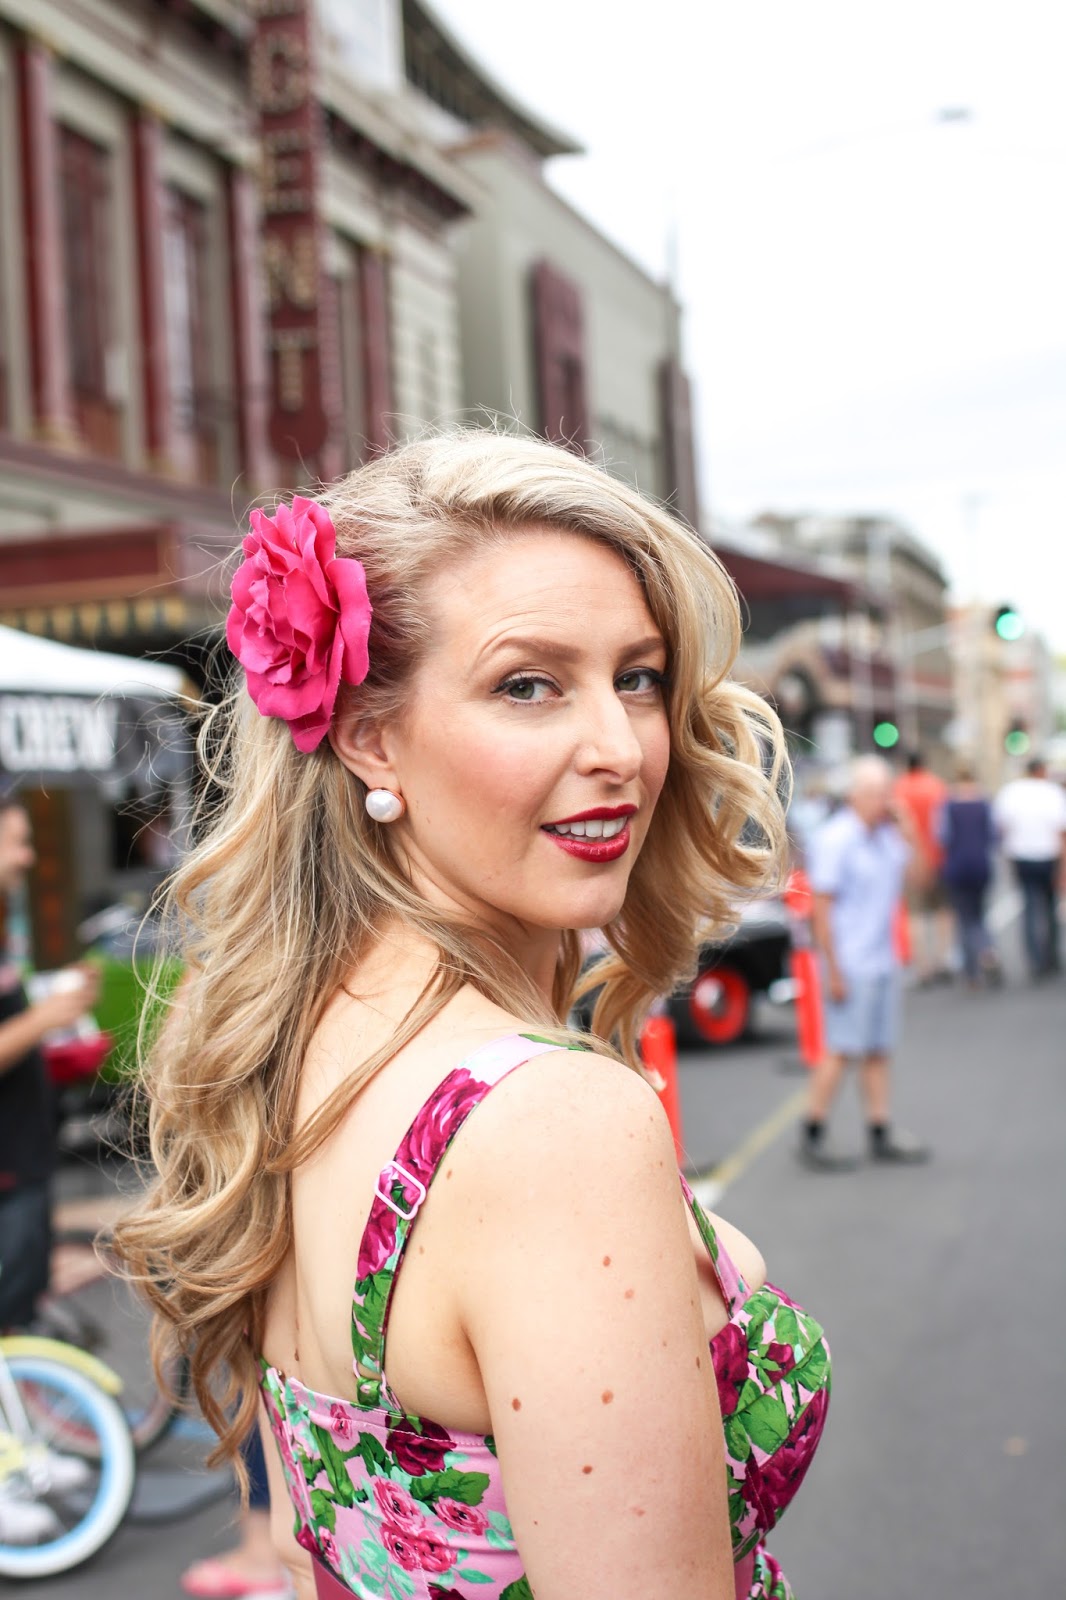 Goldfields Girl at Ballarat Beat Rockabilly Festival. Visit the Goldfields Girl blog for more fashion and lifestyle inspiration